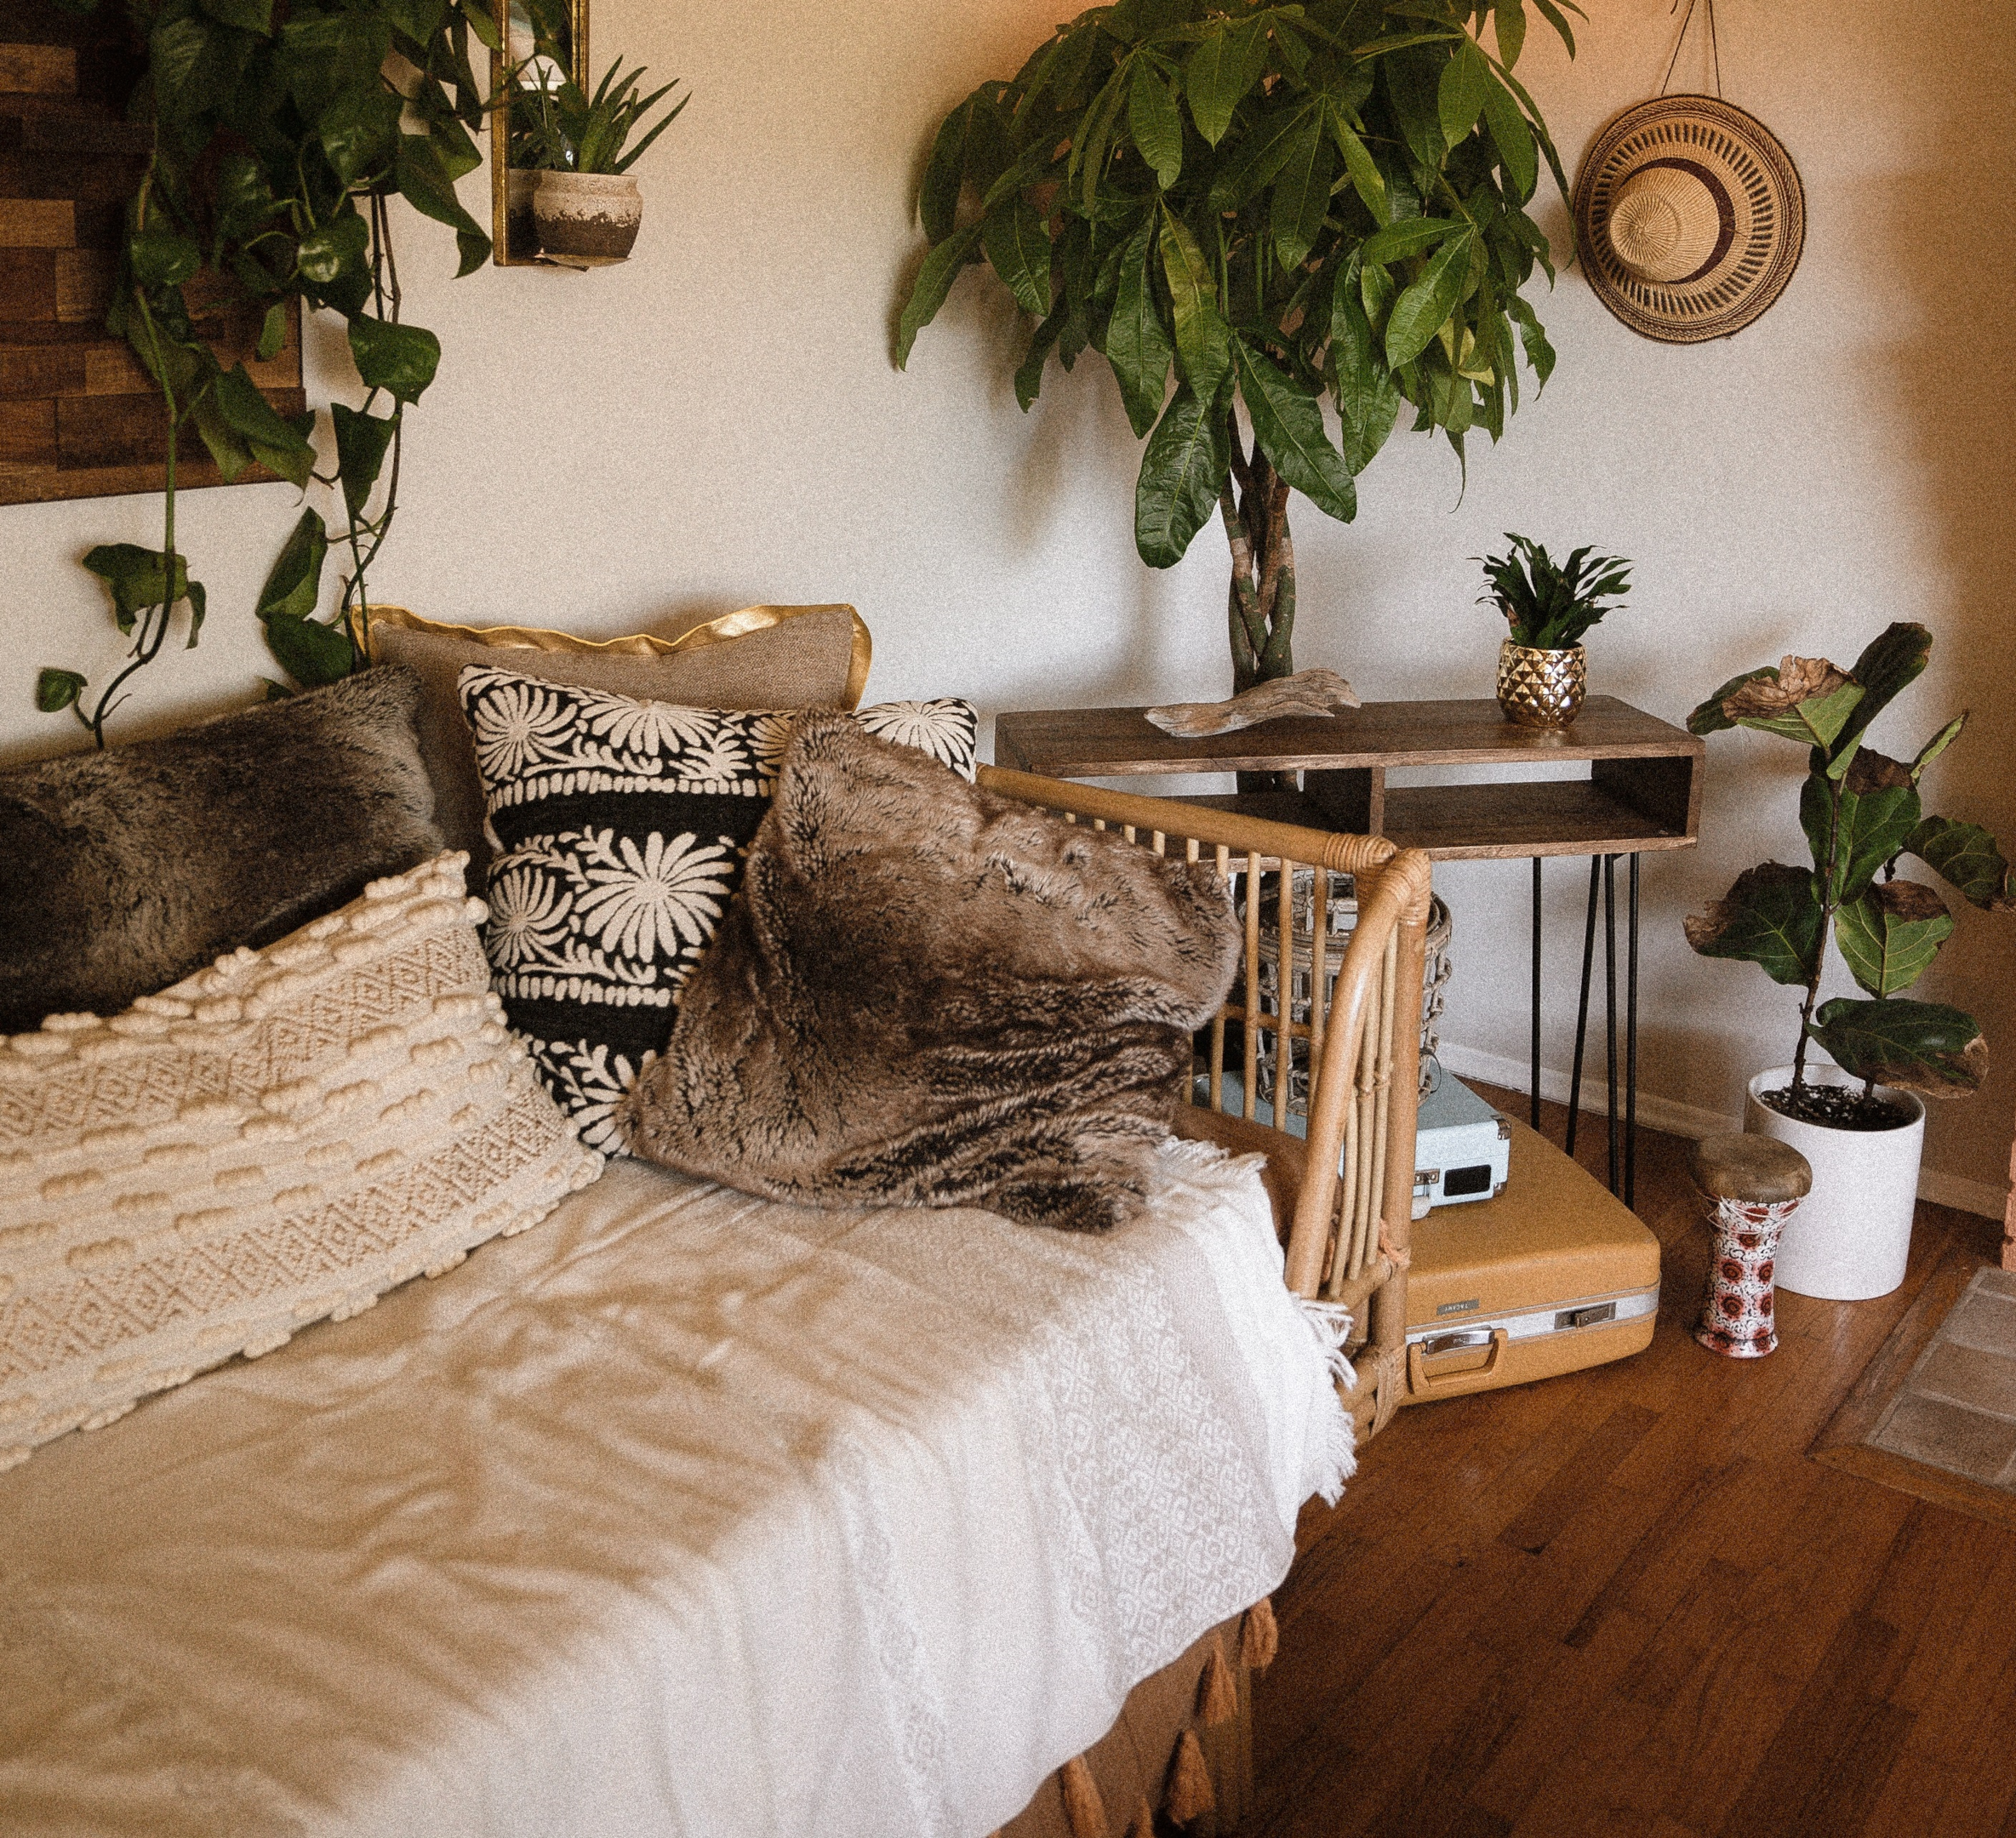 daybed and plants in boho vibe room